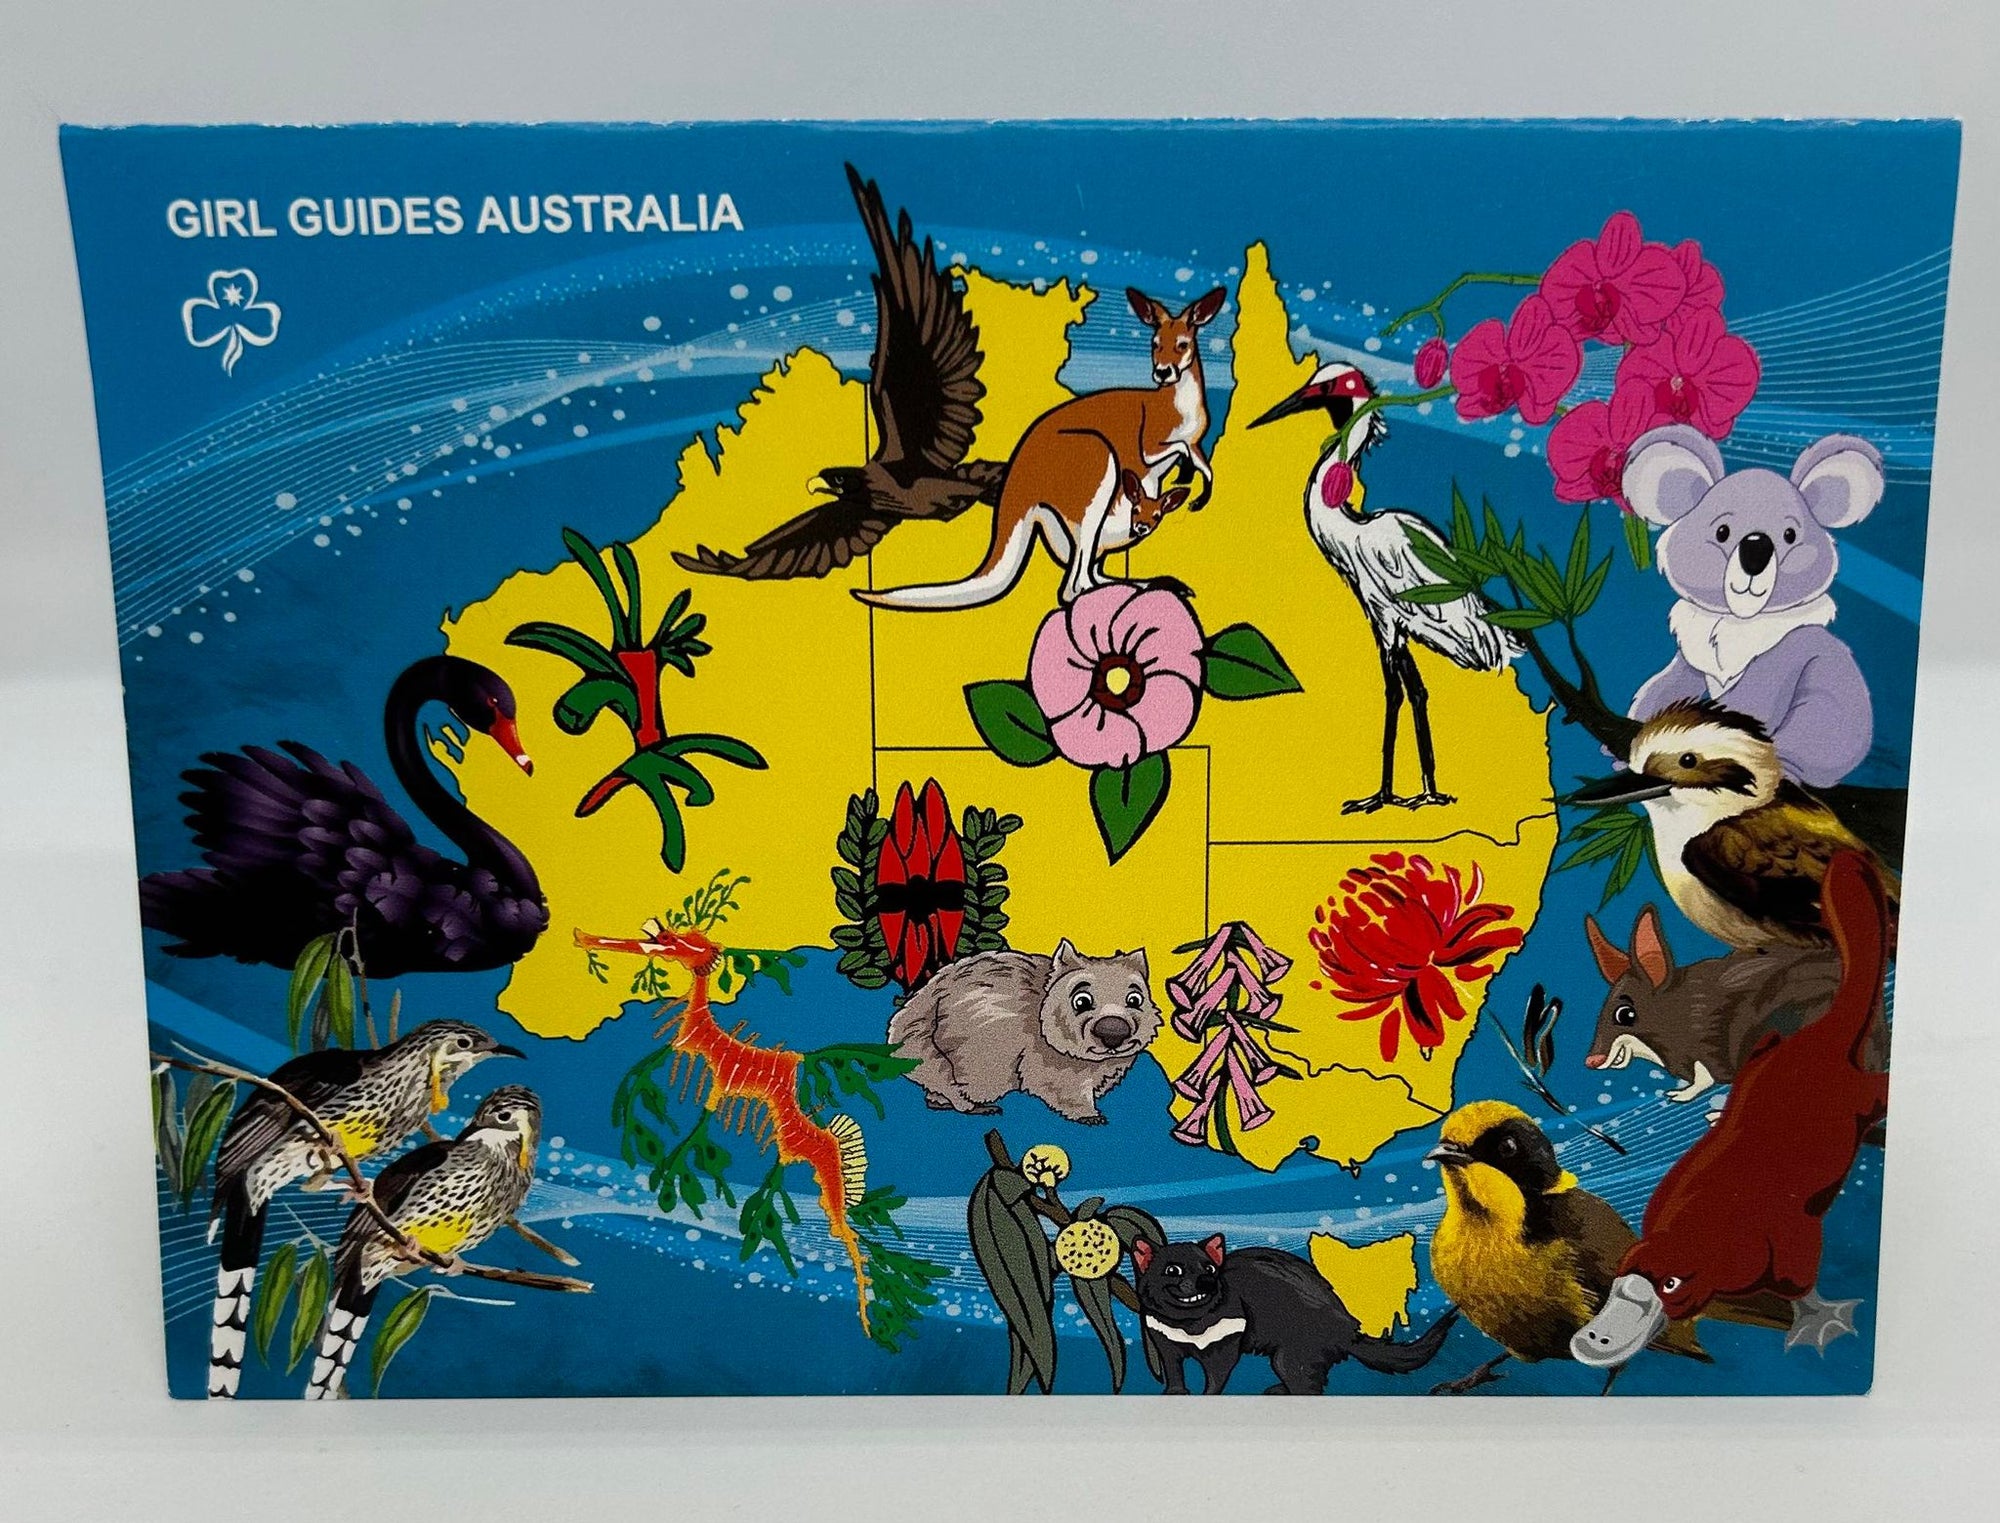 a card that is blank inside with a map of Australia and Australian flora and fauna on the front